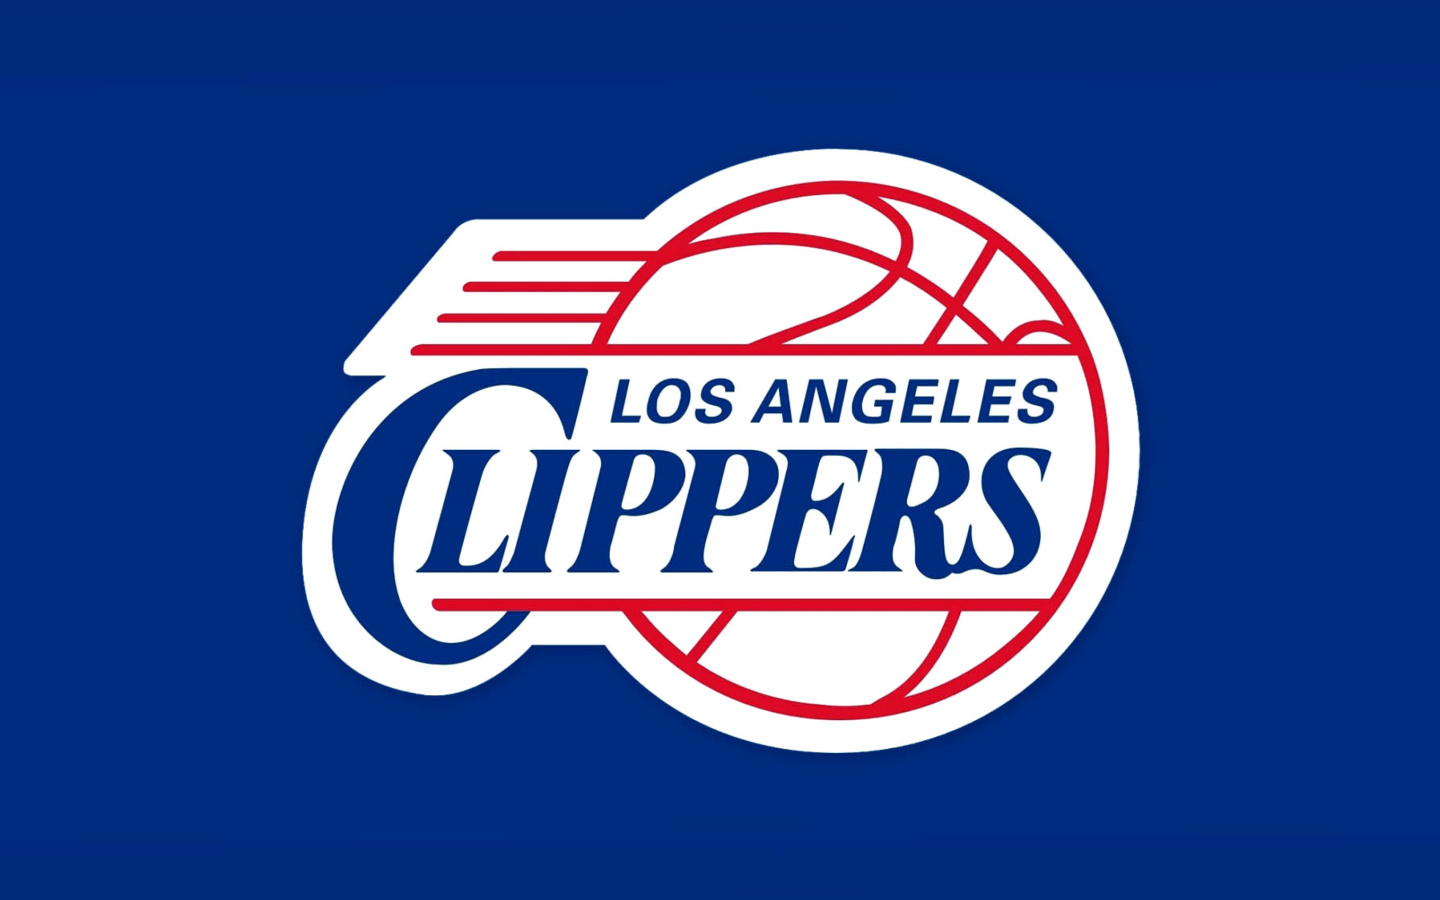 Los Angeles Clippers screenshot #1 1440x900